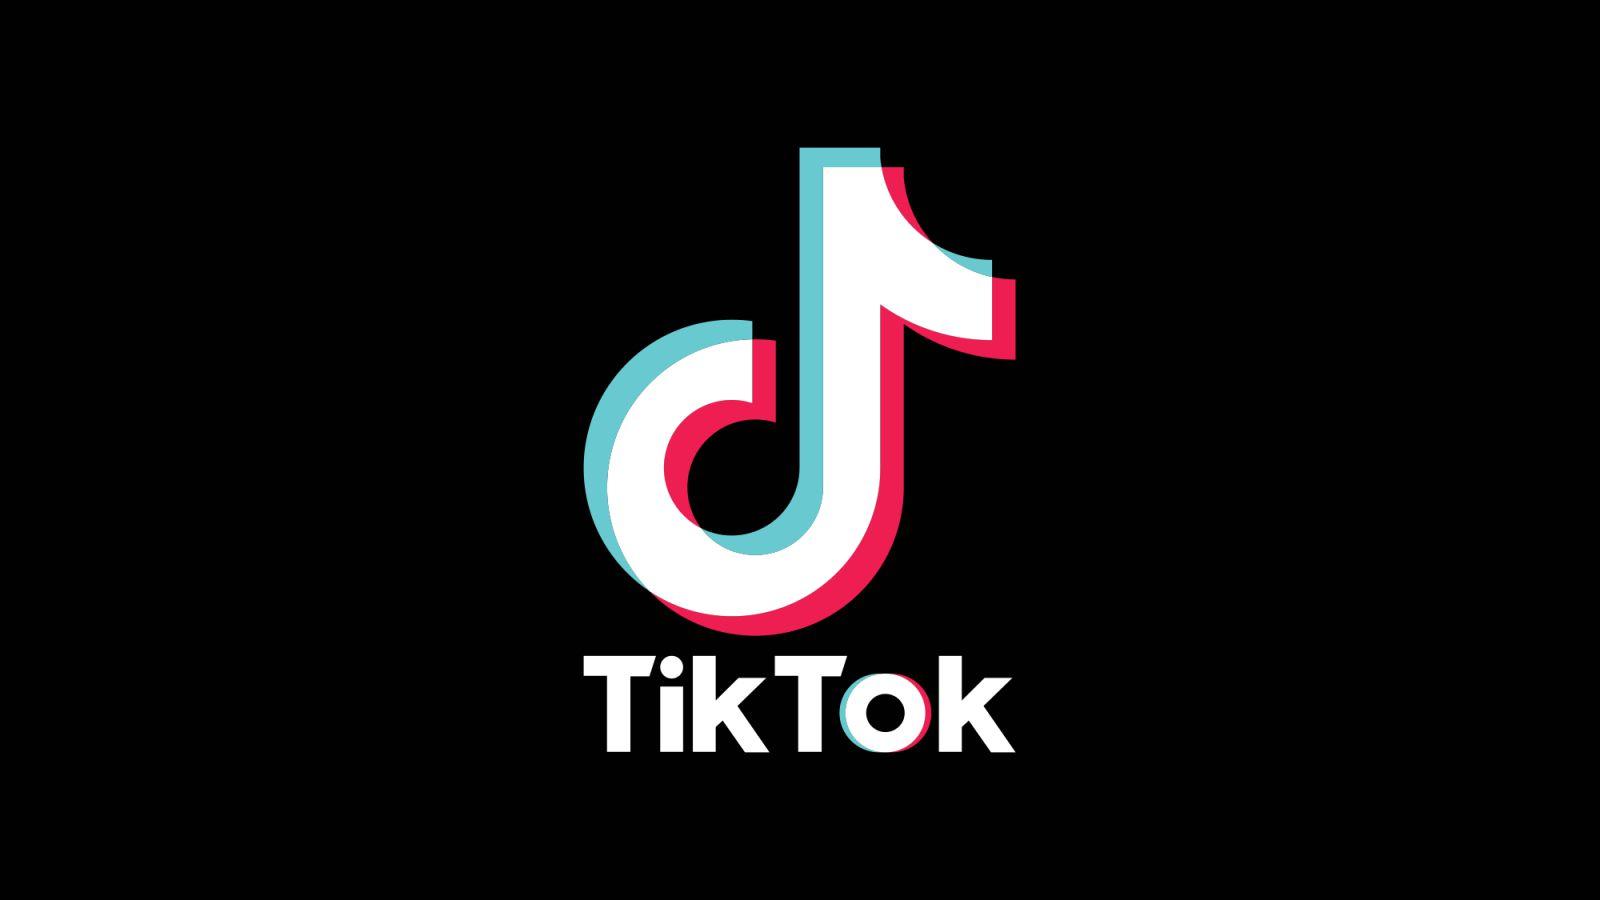 TikTok Logo - TikTok's In App Browser Reportedly Capable Of Monitoring Anything You Type